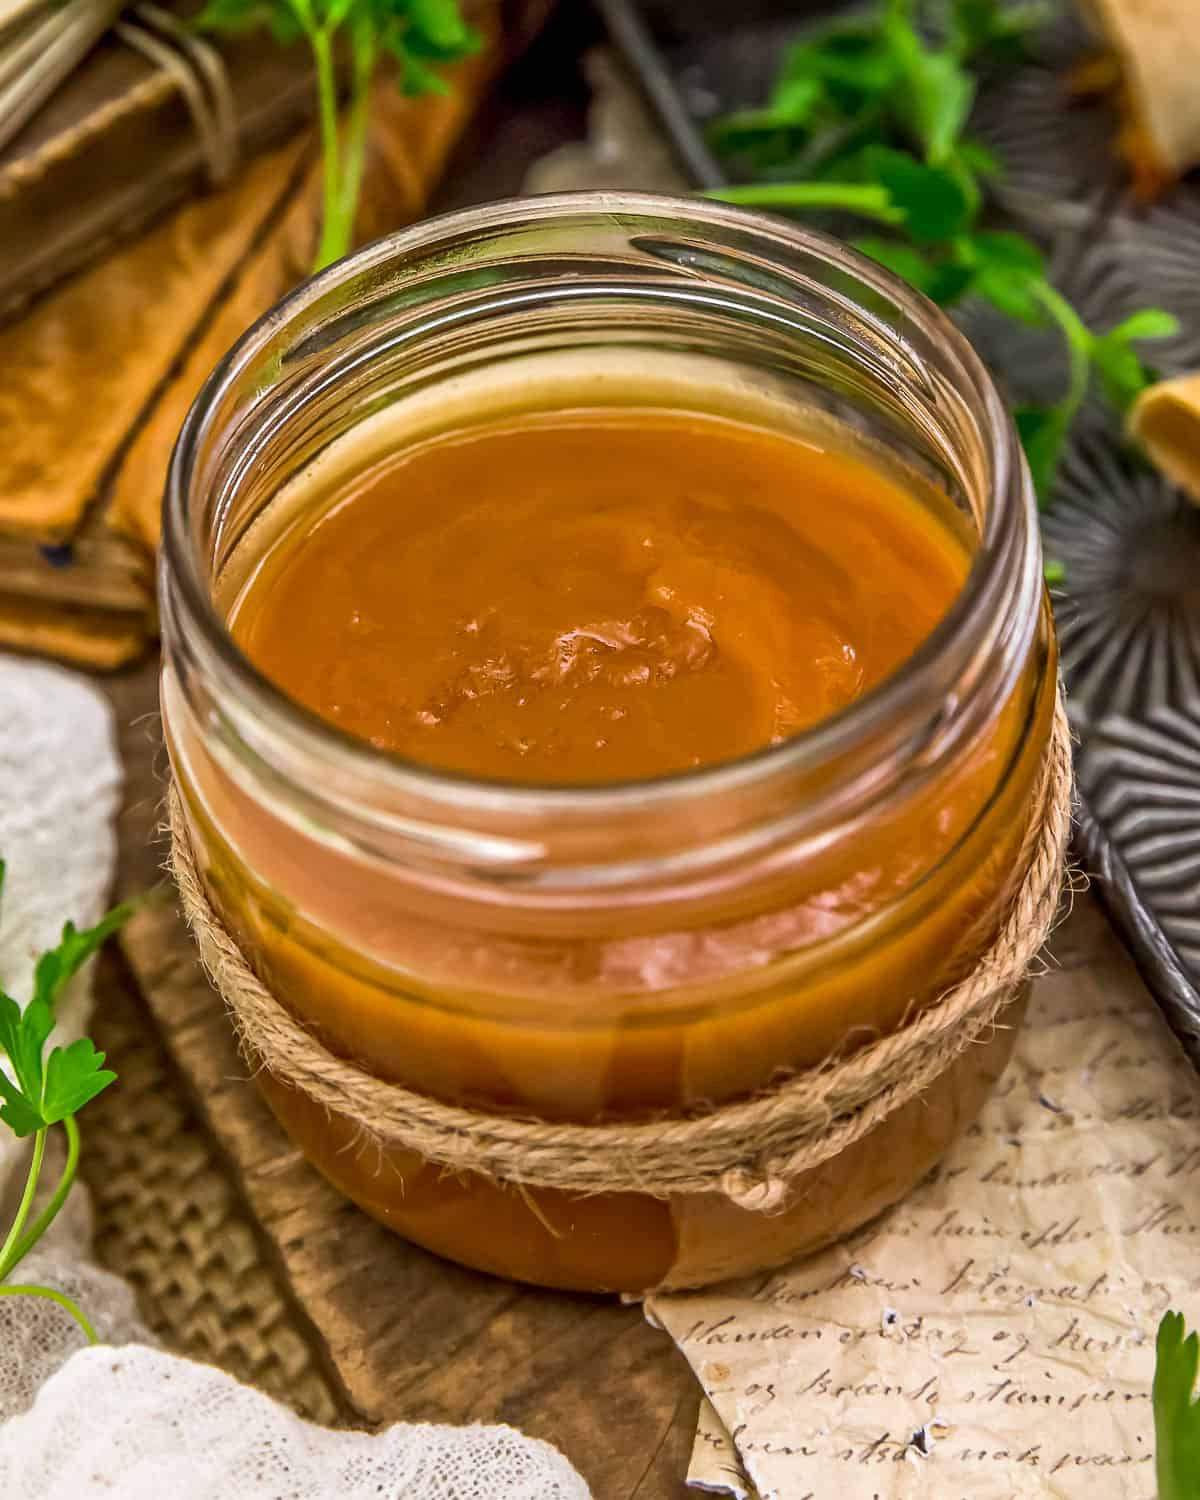 Jar of Sweet and Sour Sauce